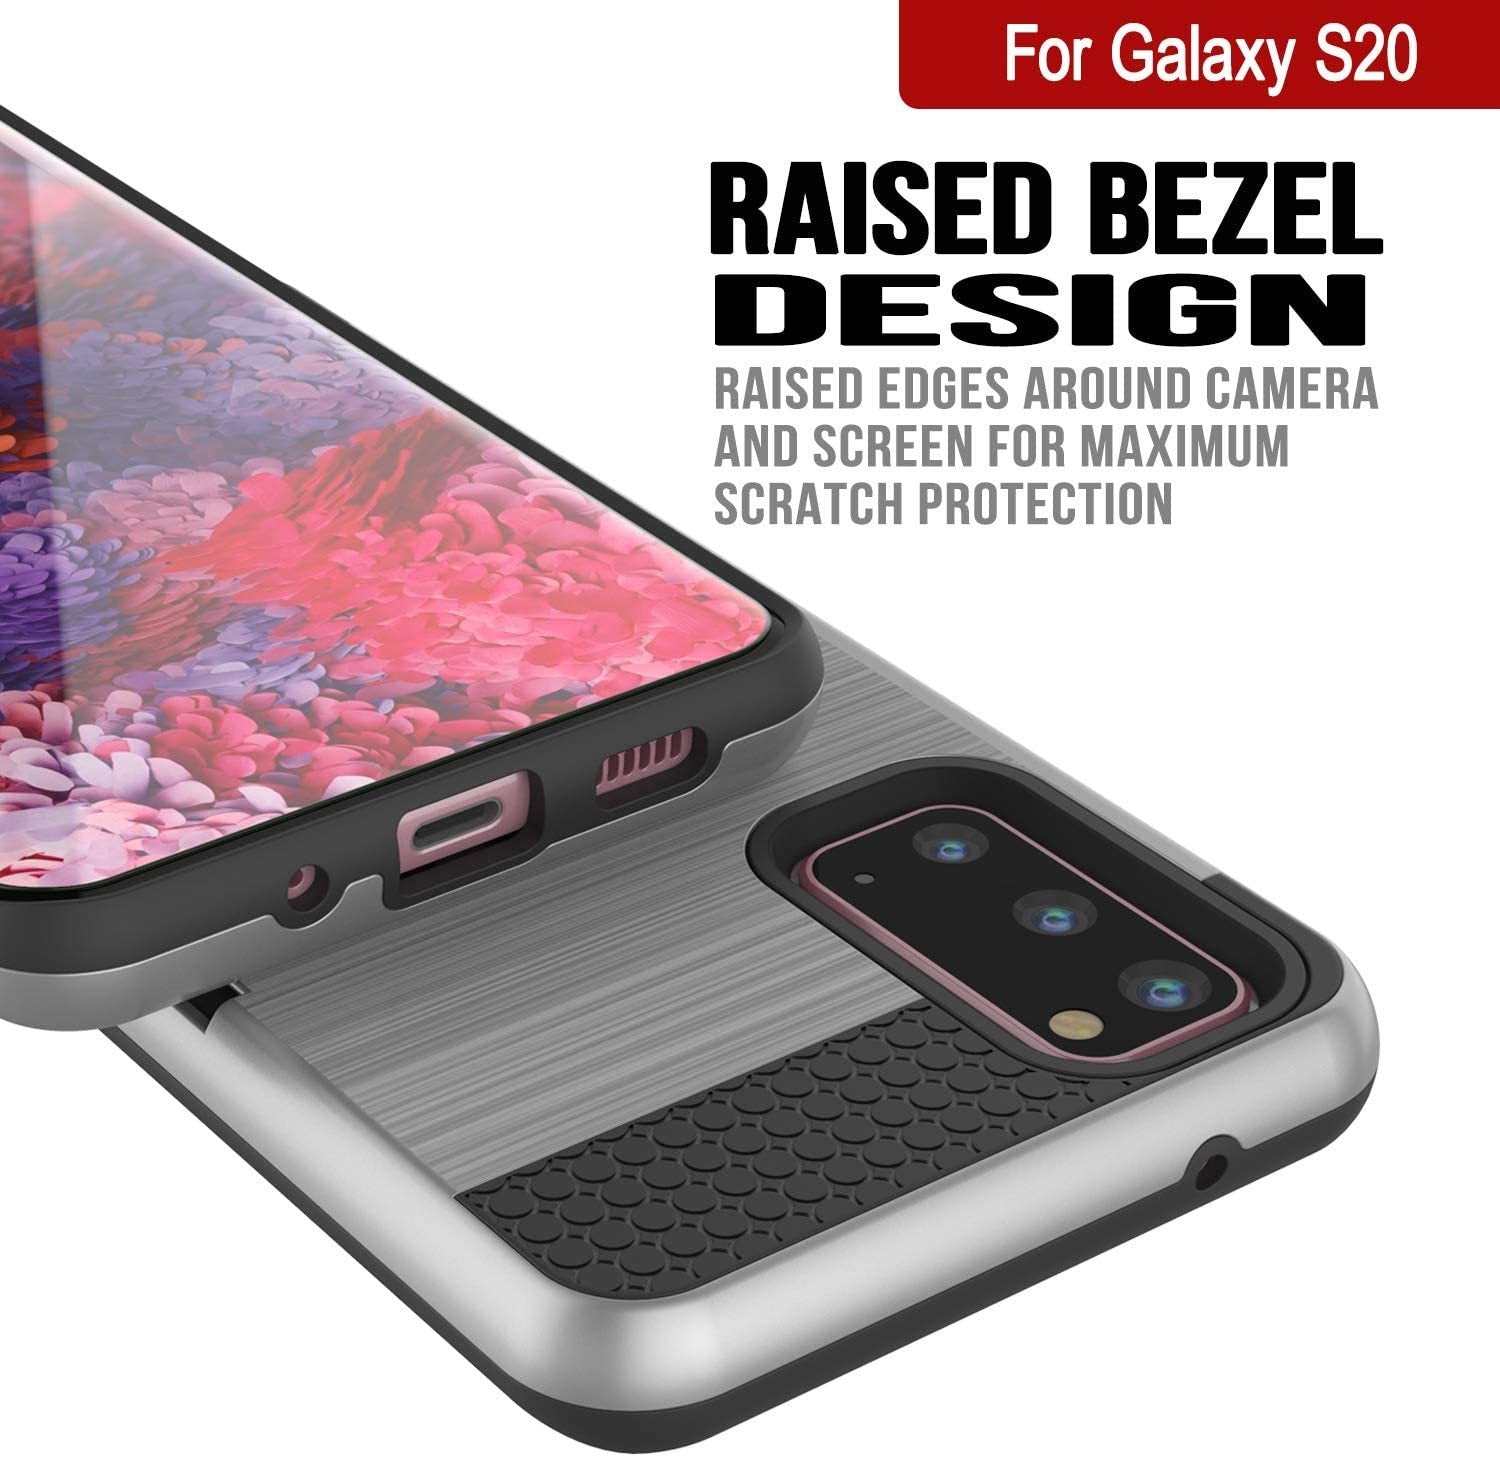 Galaxy S20 Case, PUNKcase [SLOT Series] [Slim Fit] Dual-Layer Armor Cover w/Integrated Anti-Shock System, Credit Card Slot [Silver]